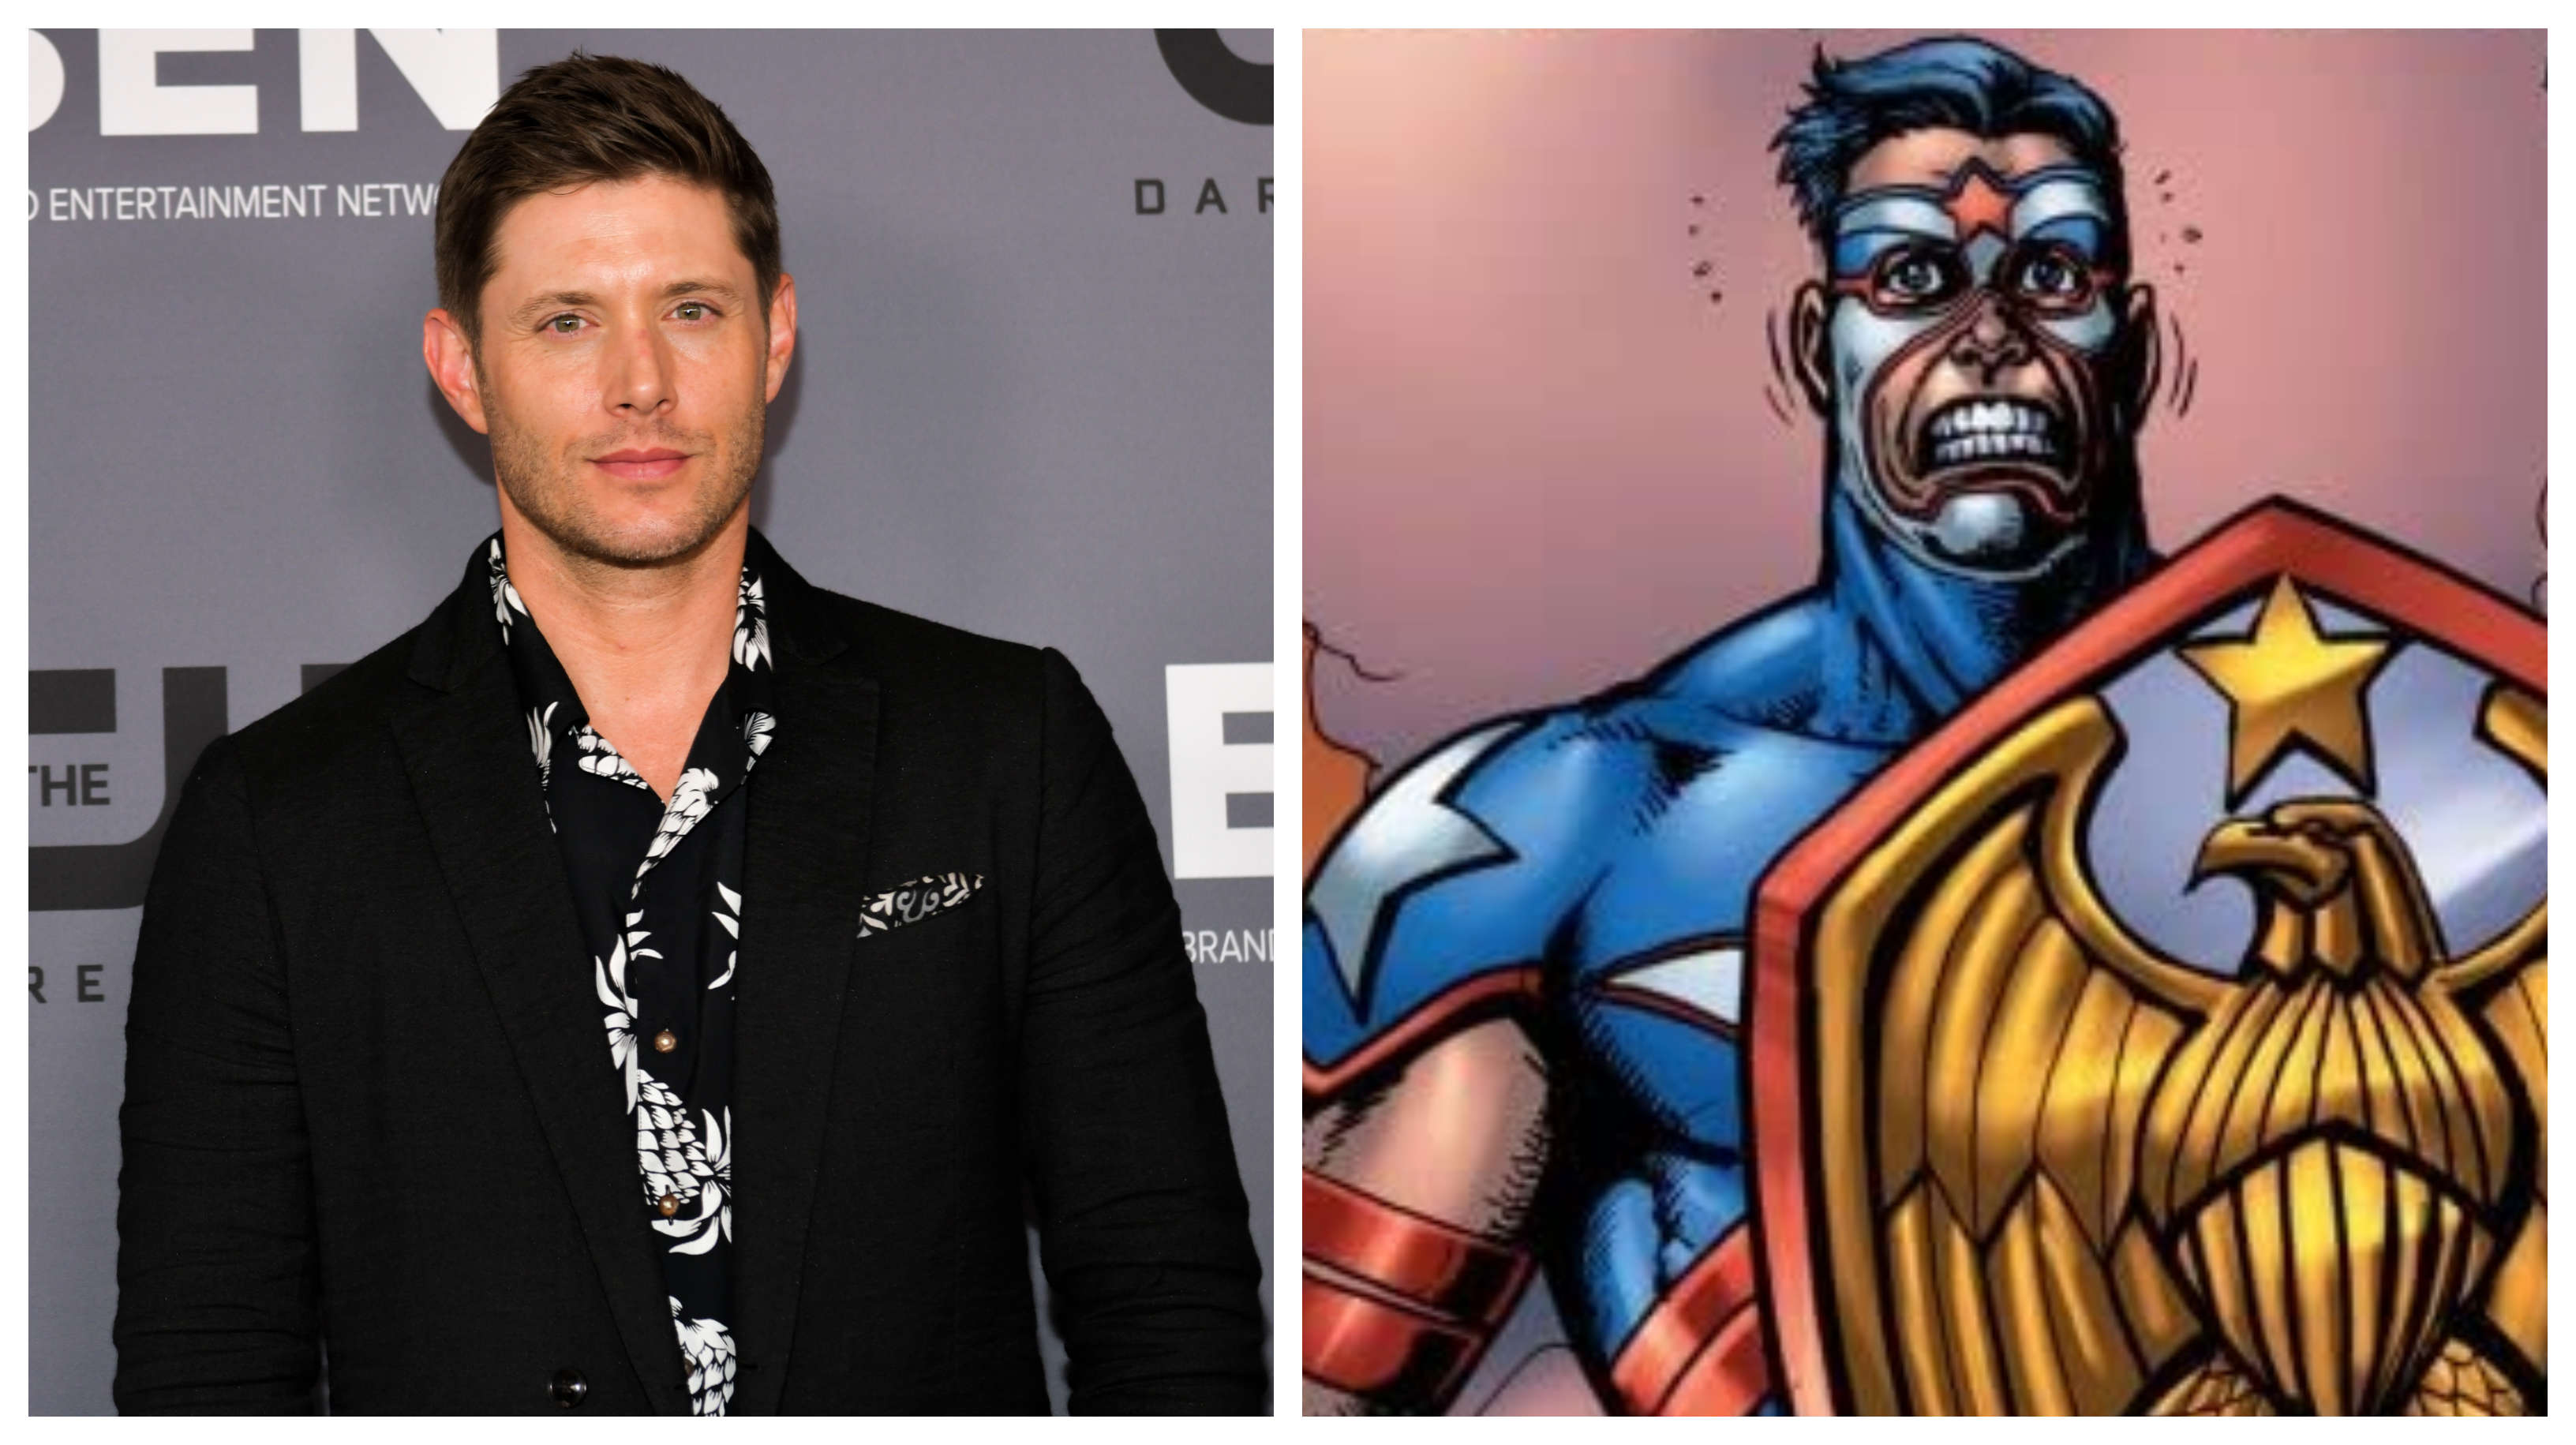 Jensen Ackles Channels Captain America Through The Lens Of Arrow In First Look At The Boys Soldier Boy In S3 Laptrinhx